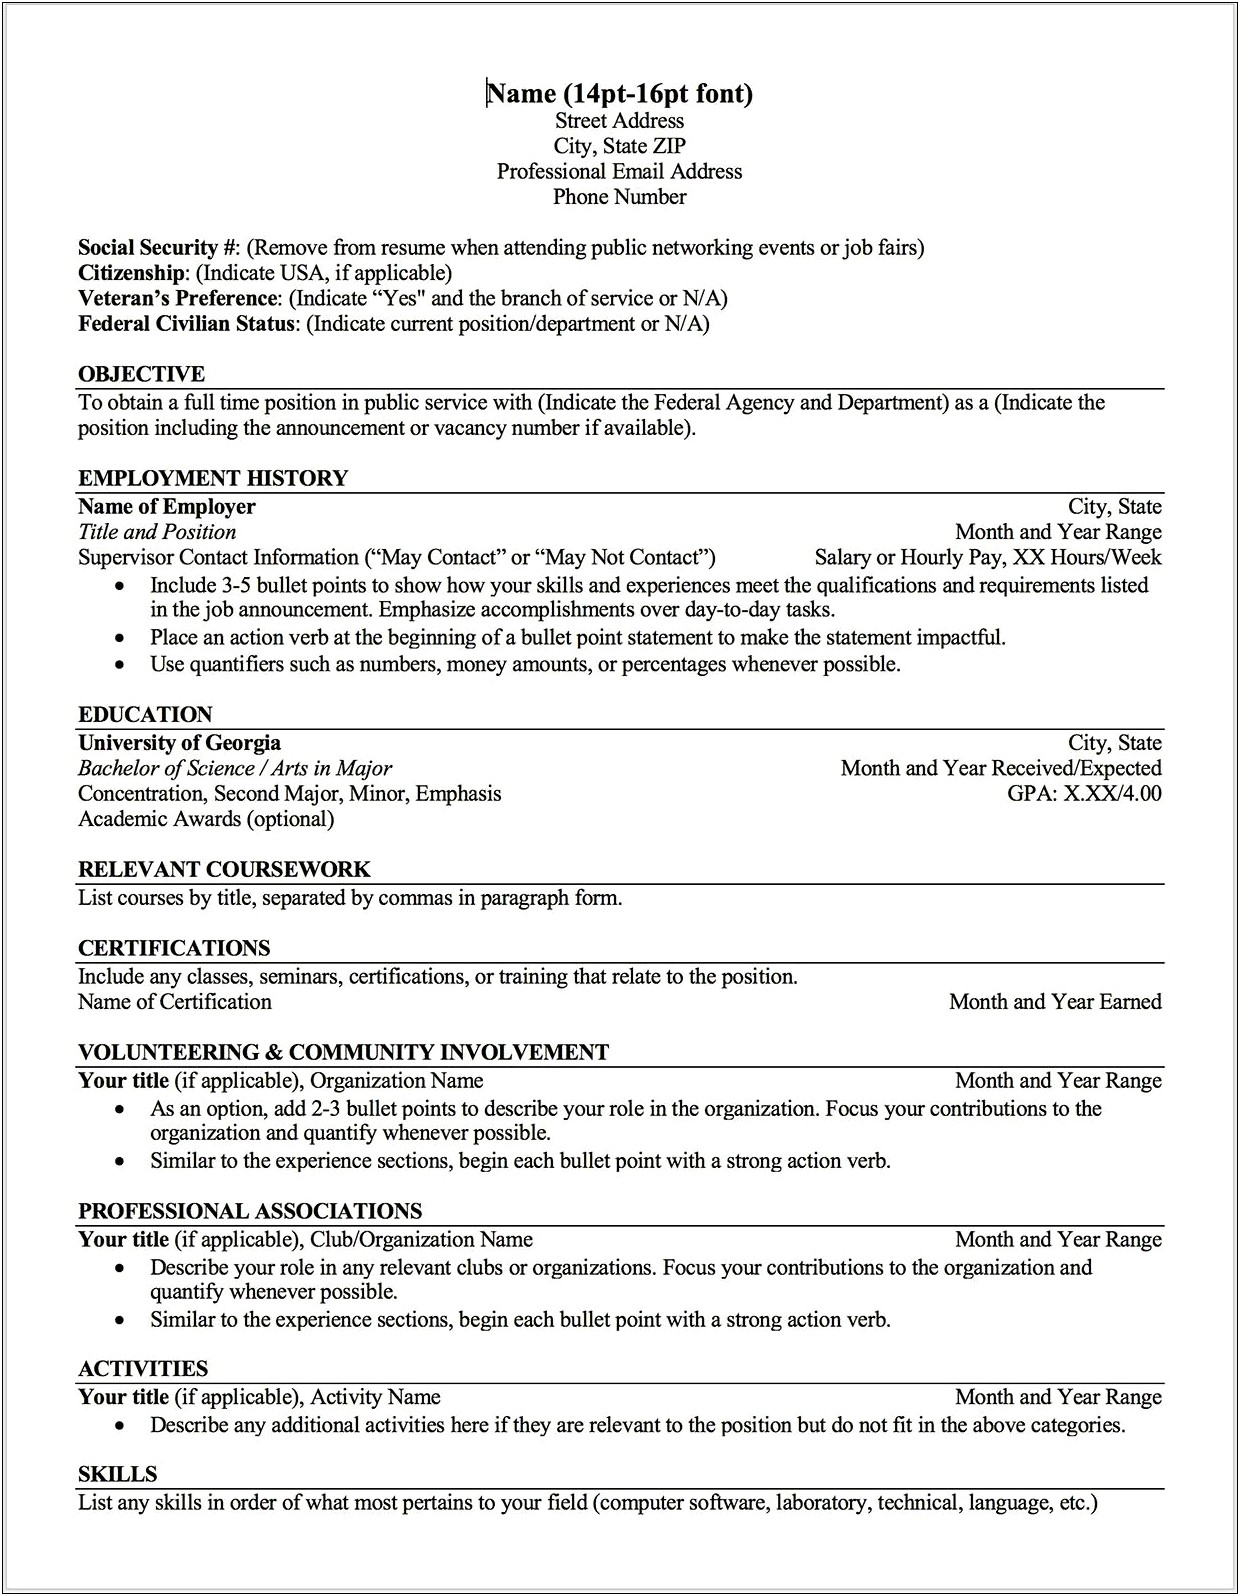 Examples Of Professional Associations On Resume